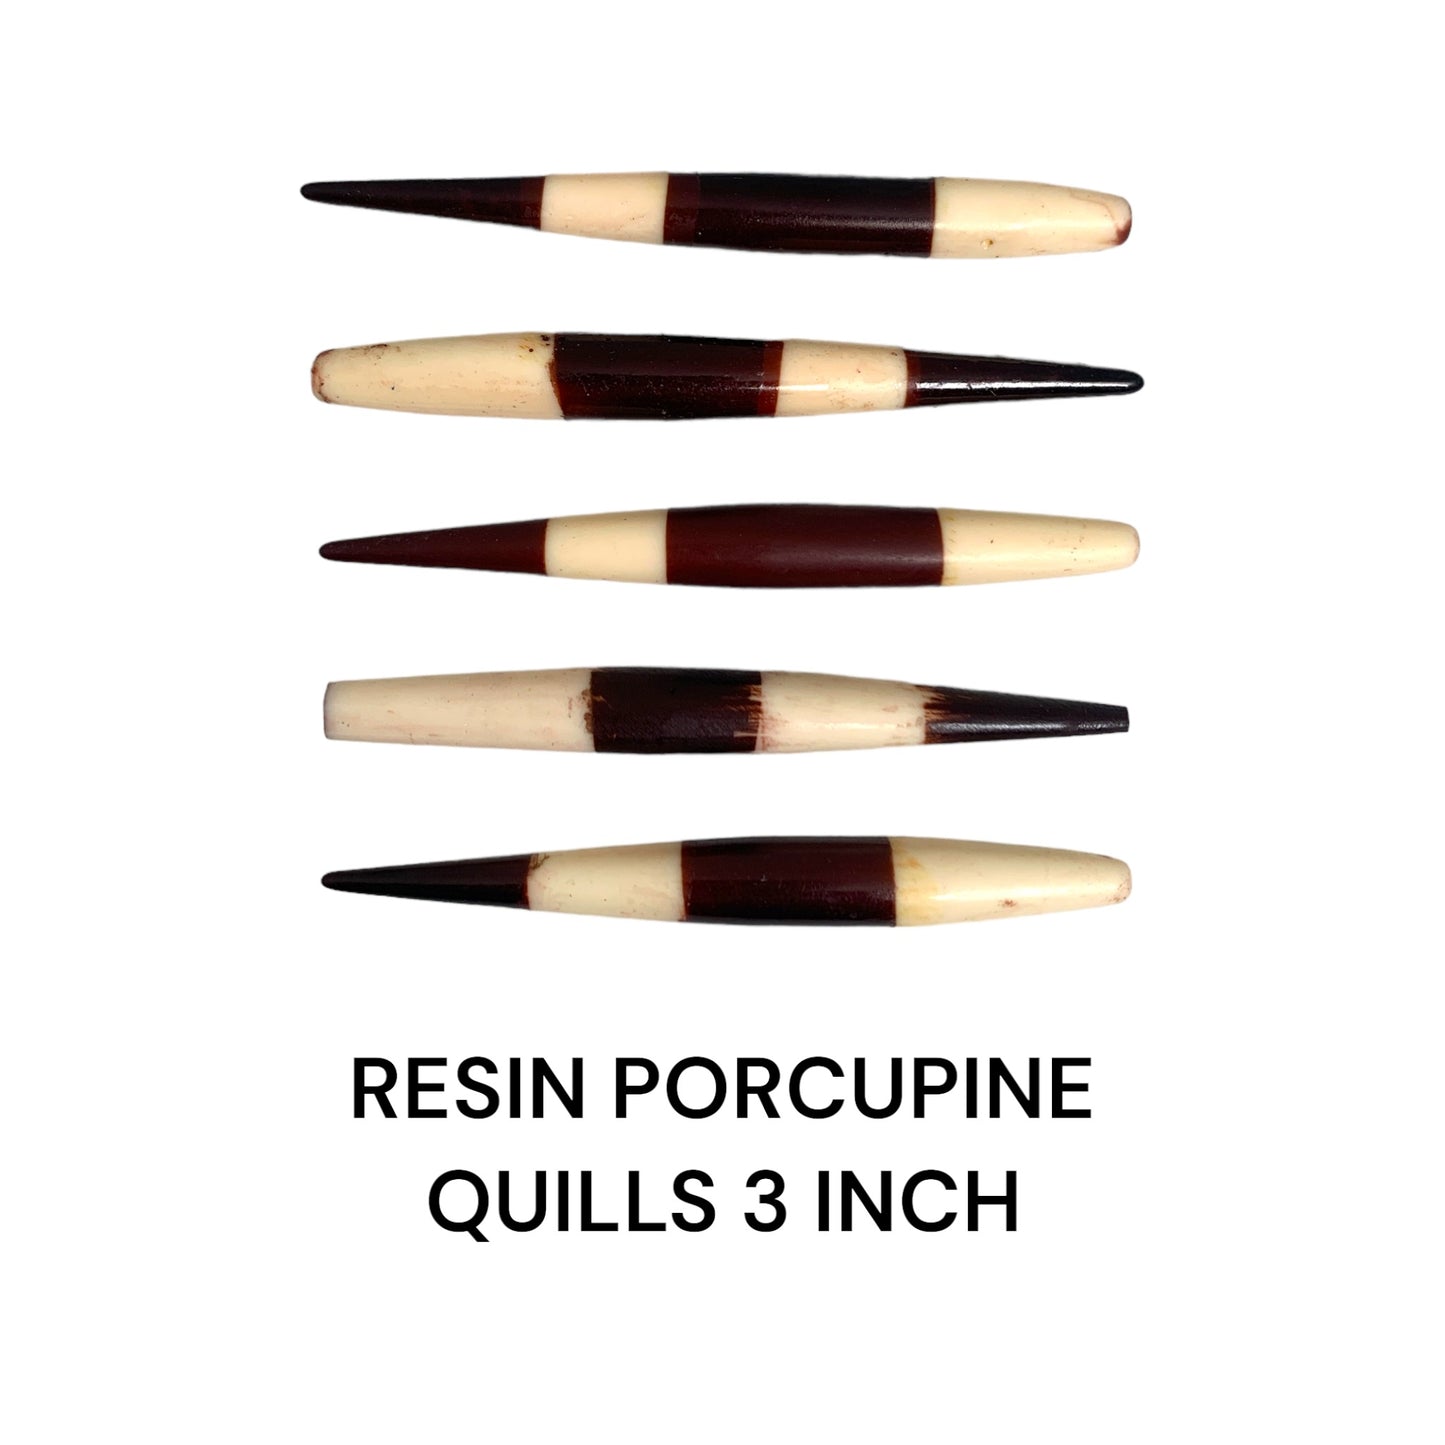 3 inch - Resin Porcupine Quill - Premium Quality - Made in India - NEW523